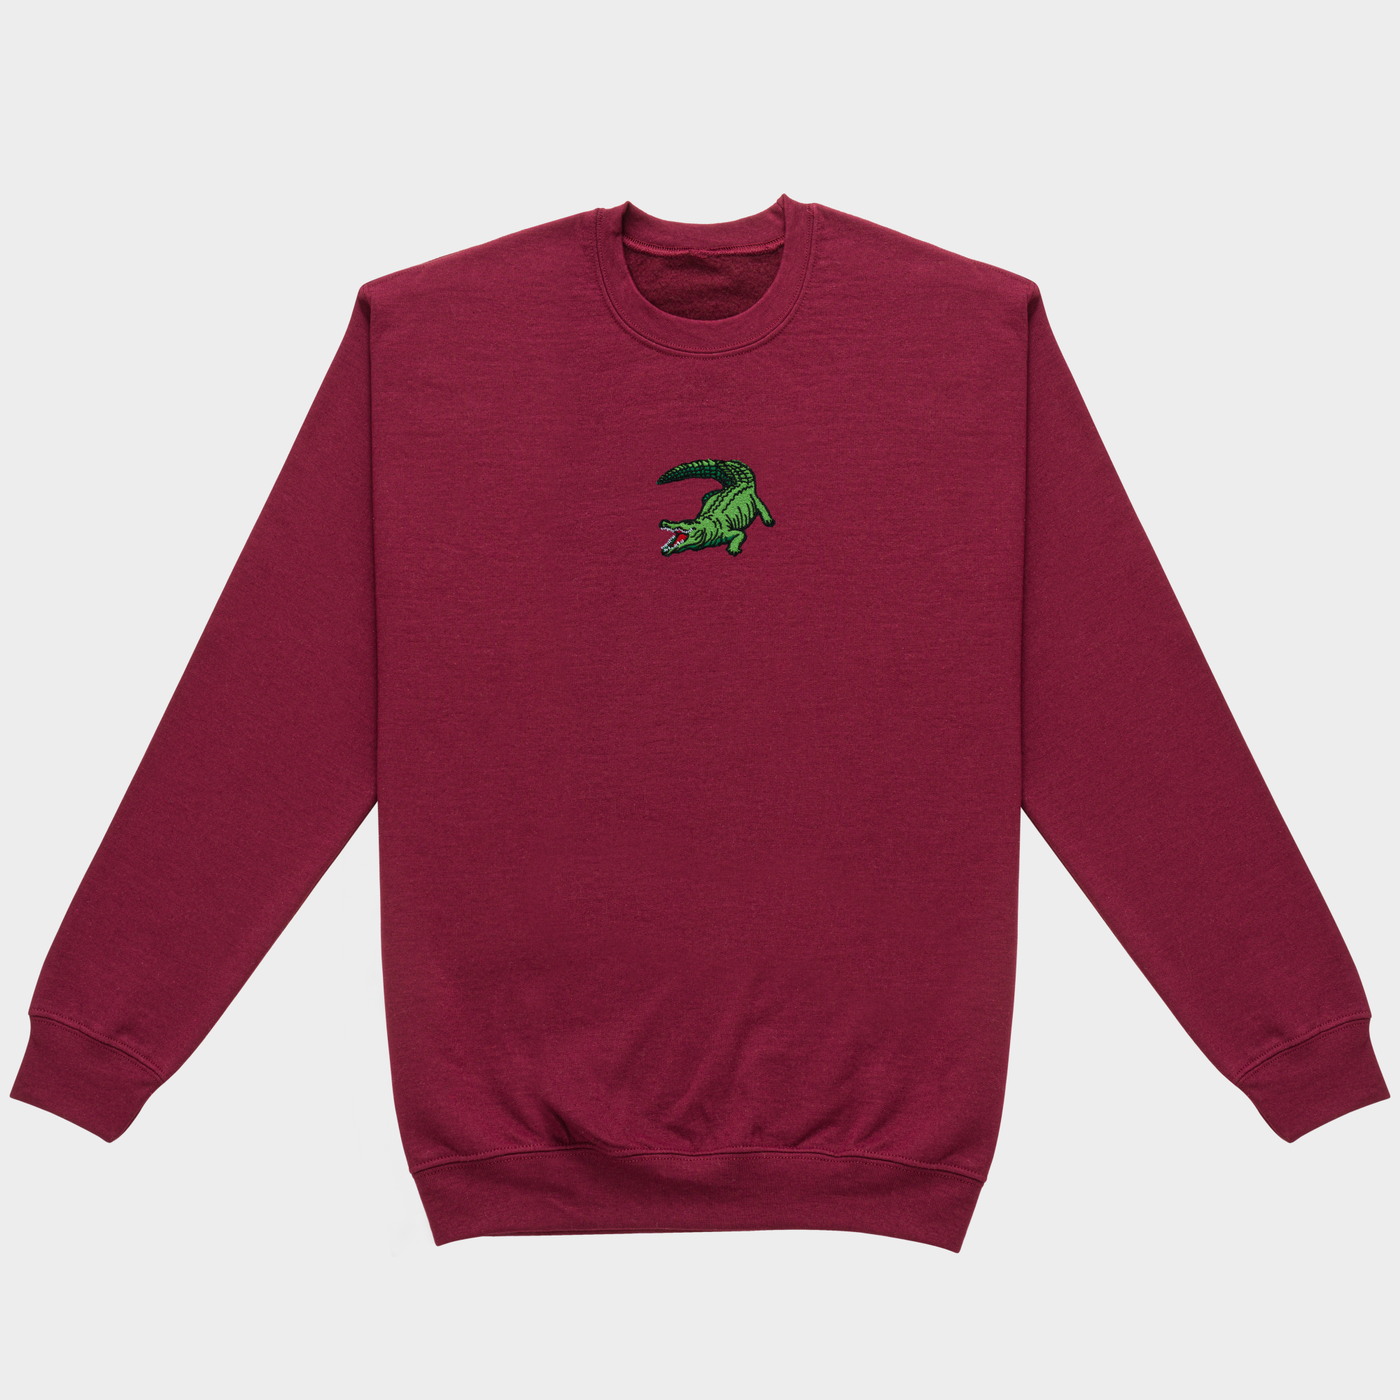 Bobby's Planet Men's Embroidered Saltwater Crocodile Sweatshirt from Australia Down Under Animals Collection in Maroon Color#color_maroon